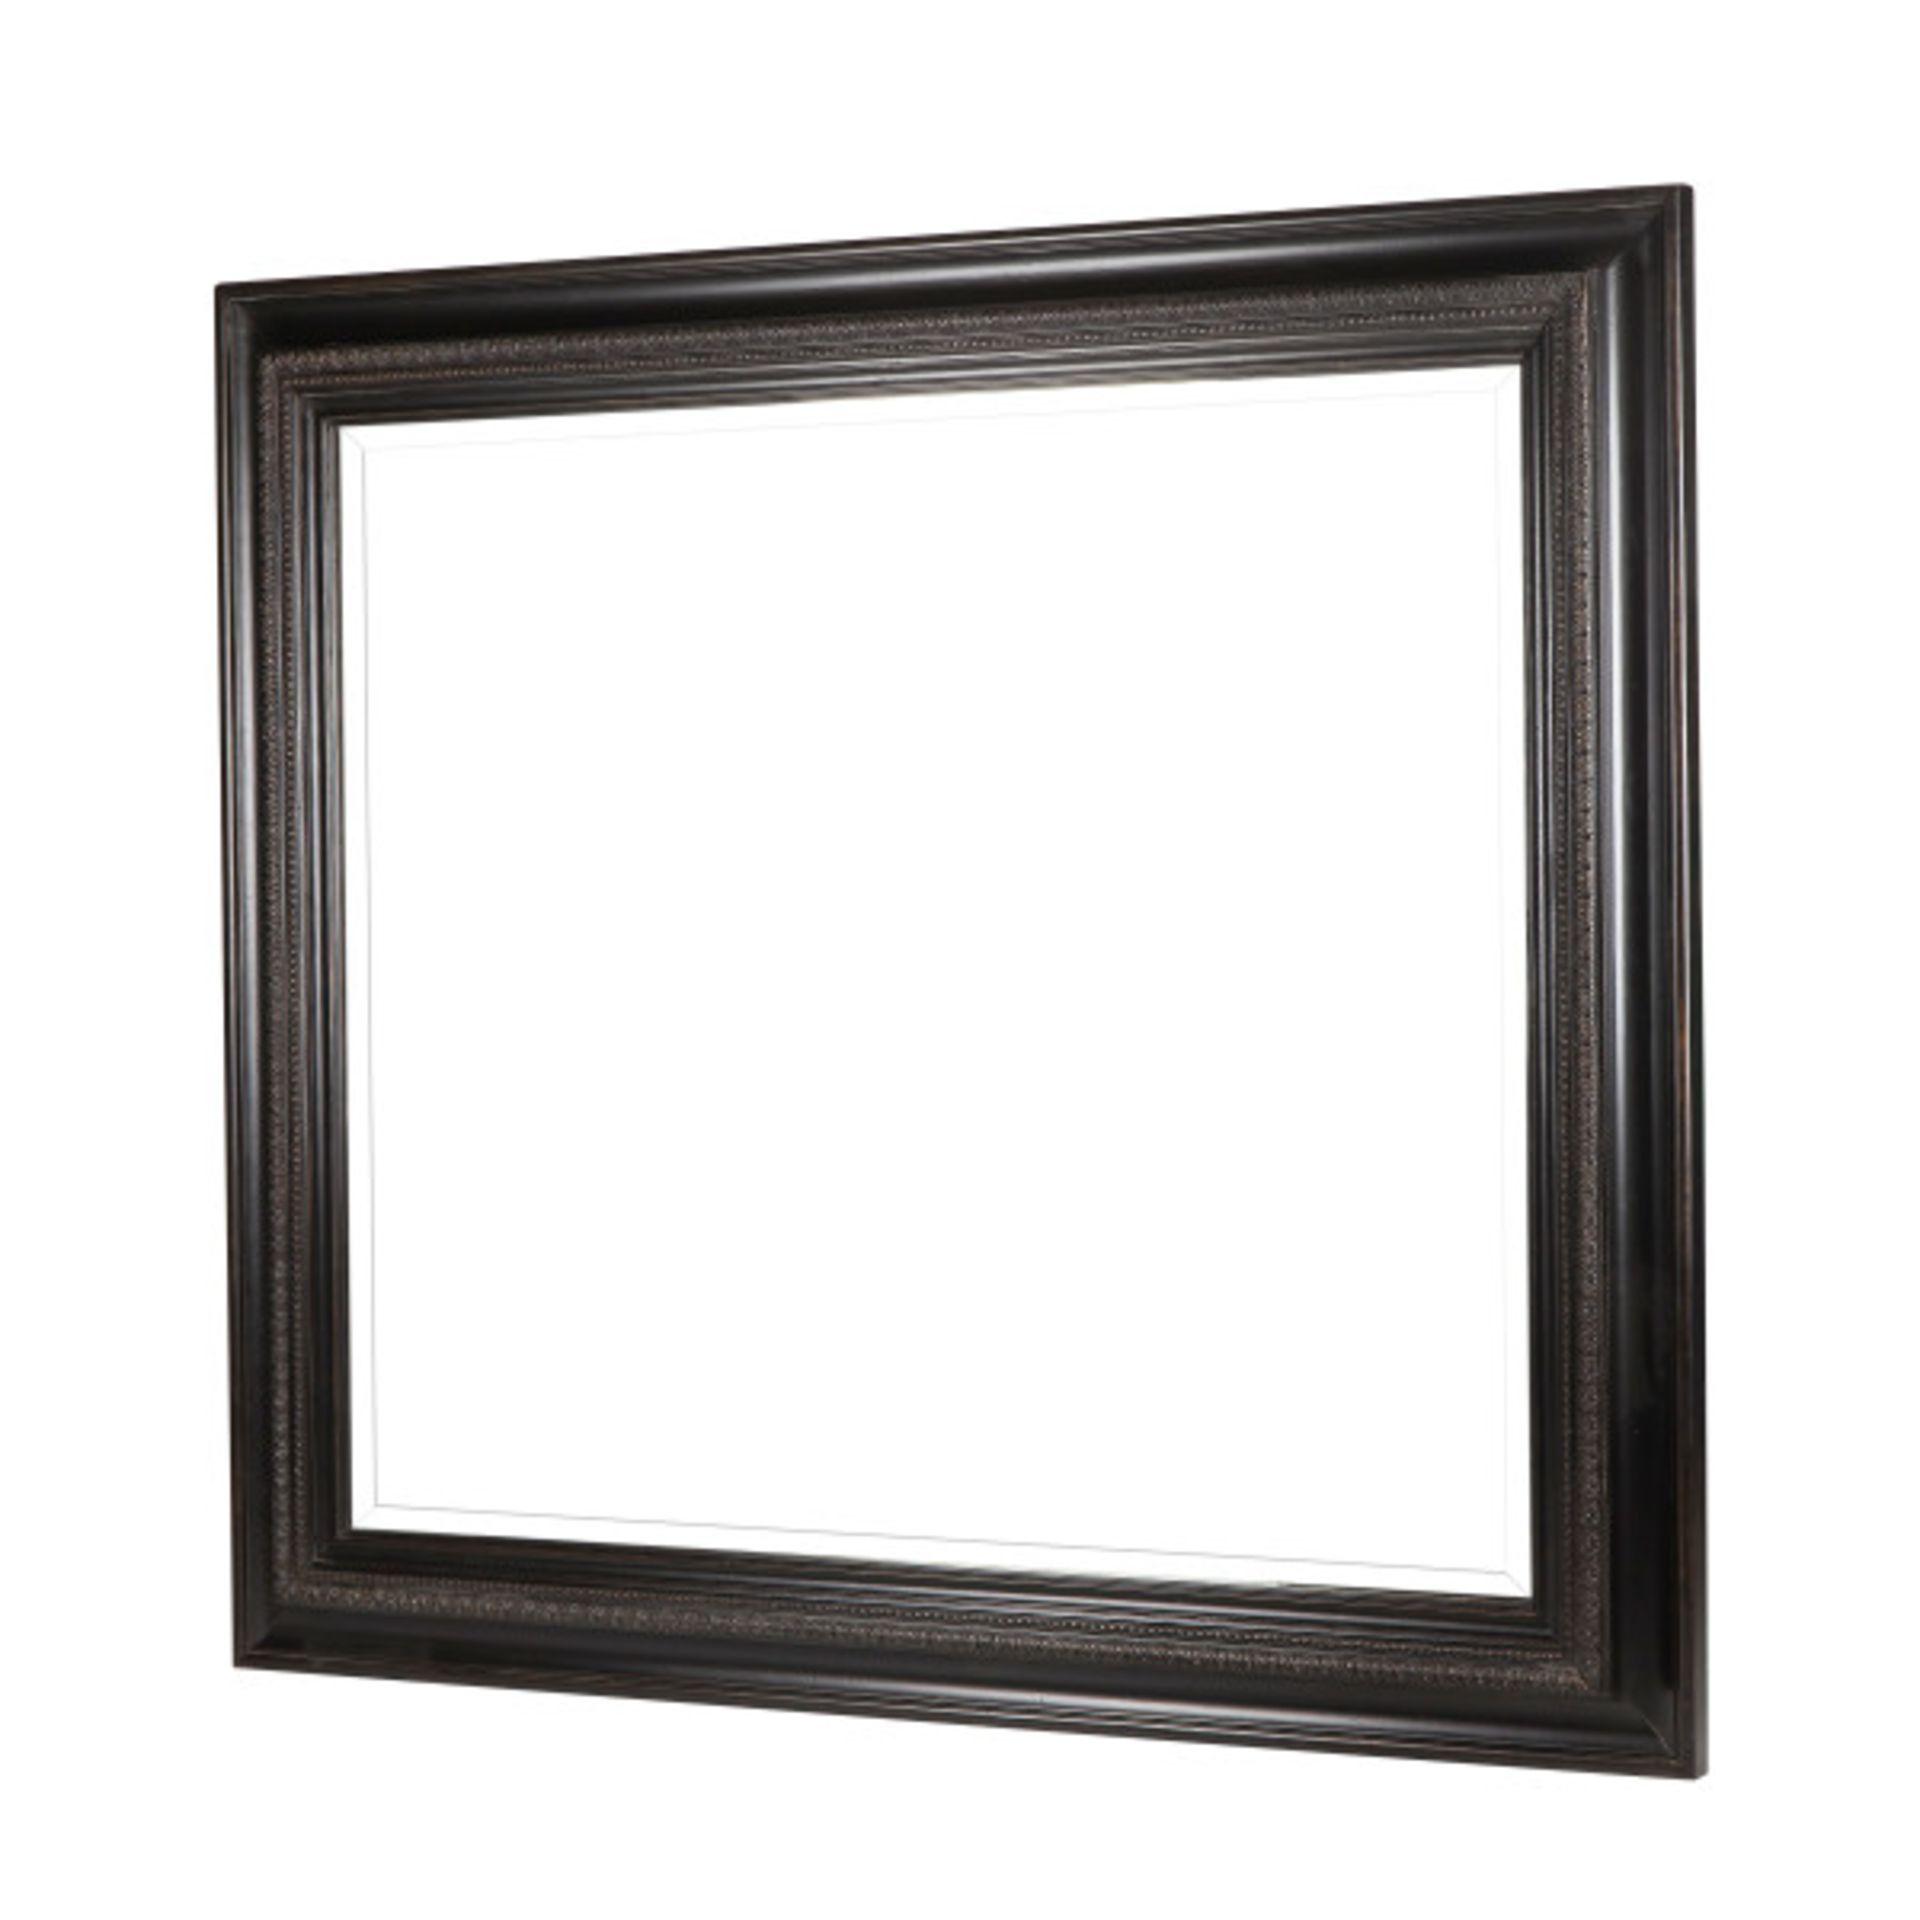 Maison 55 Lyons Floor Mirror A Huge And Stunning Mirror In Modern Contemporary Frame 230.3 X 11 X